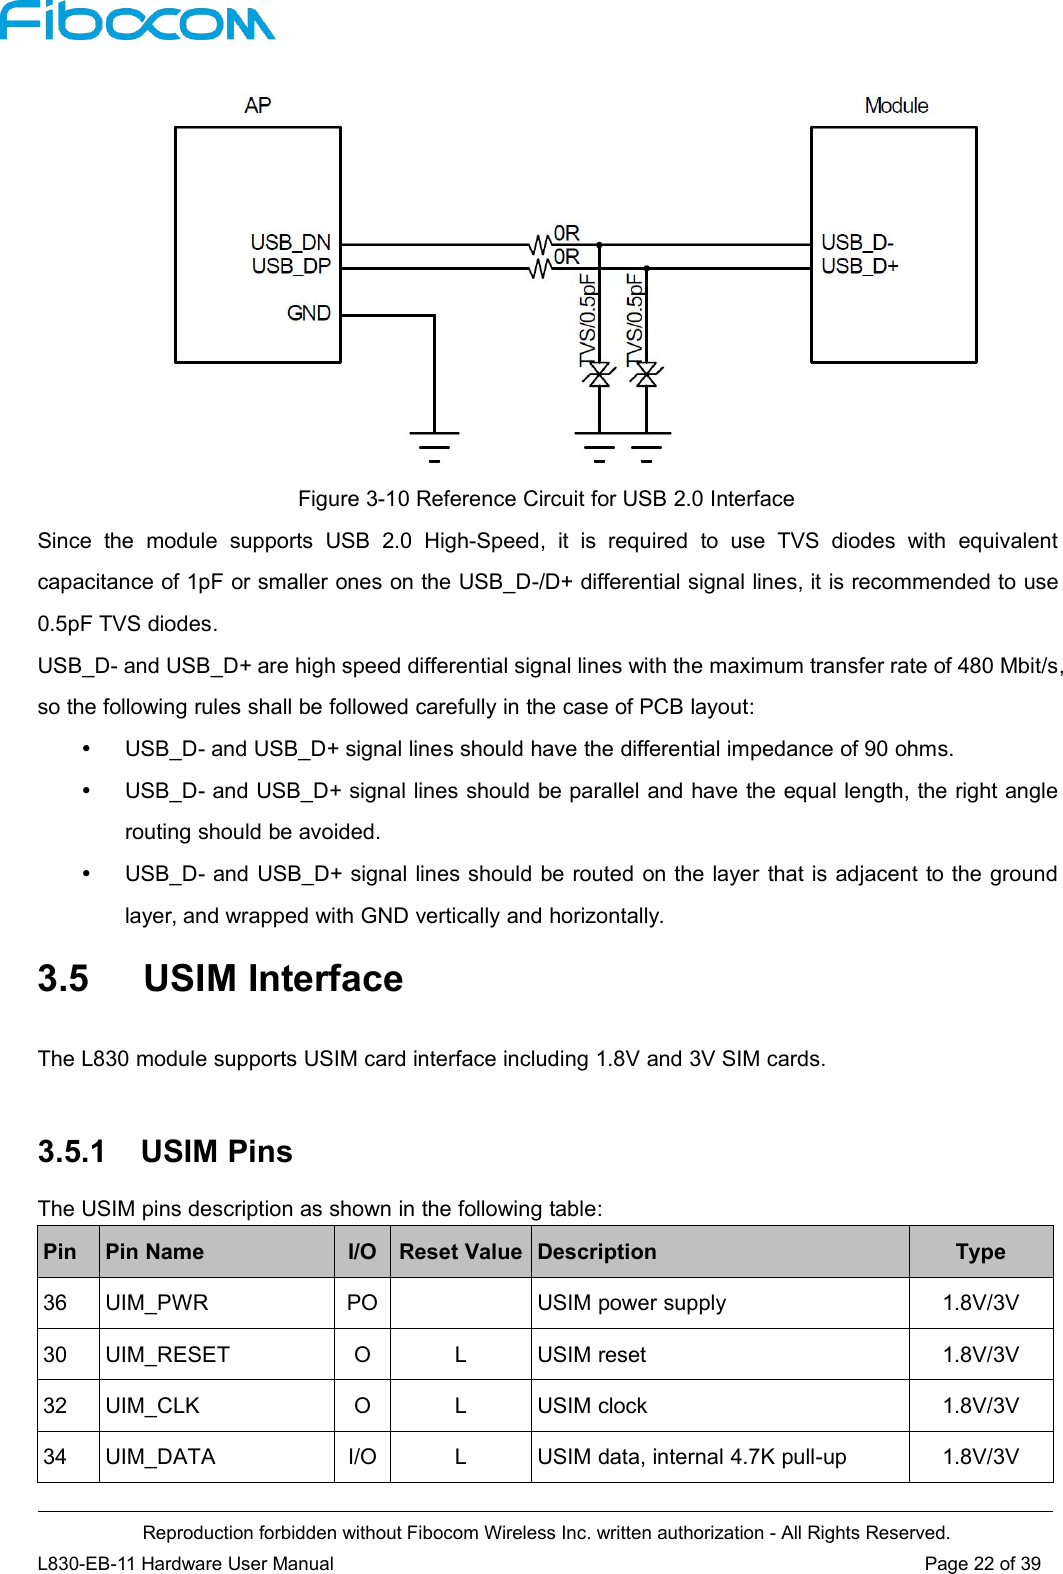 Reproduction forbidden without Fibocom Wireless Inc. written authorization - All Rights Reserved.L830-EB-11 Hardware User Manual Page 22 of 39Figure 3-10 Reference Circuit for USB 2.0 InterfaceSince the module supports USB 2.0 High-Speed, it is required to use TVS diodes with equivalentcapacitance of 1pF or smaller ones on the USB_D-/D+ differential signal lines, it is recommended to use0.5pF TVS diodes.USB_D- and USB_D+ are high speed differential signal lines with the maximum transfer rate of 480 Mbit/s,so the following rules shall be followed carefully in the case of PCB layout:USB_D- and USB_D+ signal lines should have the differential impedance of 90 ohms.USB_D- and USB_D+ signal lines should be parallel and have the equal length, the right anglerouting should be avoided.USB_D- and USB_D+ signal lines should be routed on the layer that is adjacent to the groundlayer, and wrapped with GND vertically and horizontally.3.5 USIM InterfaceThe L830 module supports USIM card interface including 1.8V and 3V SIM cards.3.5.1 USIM PinsThe USIM pins description as shown in the following table:PinPin NameI/OReset ValueDescriptionType36UIM_PWRPOUSIM power supply1.8V/3V30UIM_RESETOLUSIM reset1.8V/3V32UIM_CLKOLUSIM clock1.8V/3V34UIM_DATAI/OLUSIM data, internal 4.7K pull-up1.8V/3V